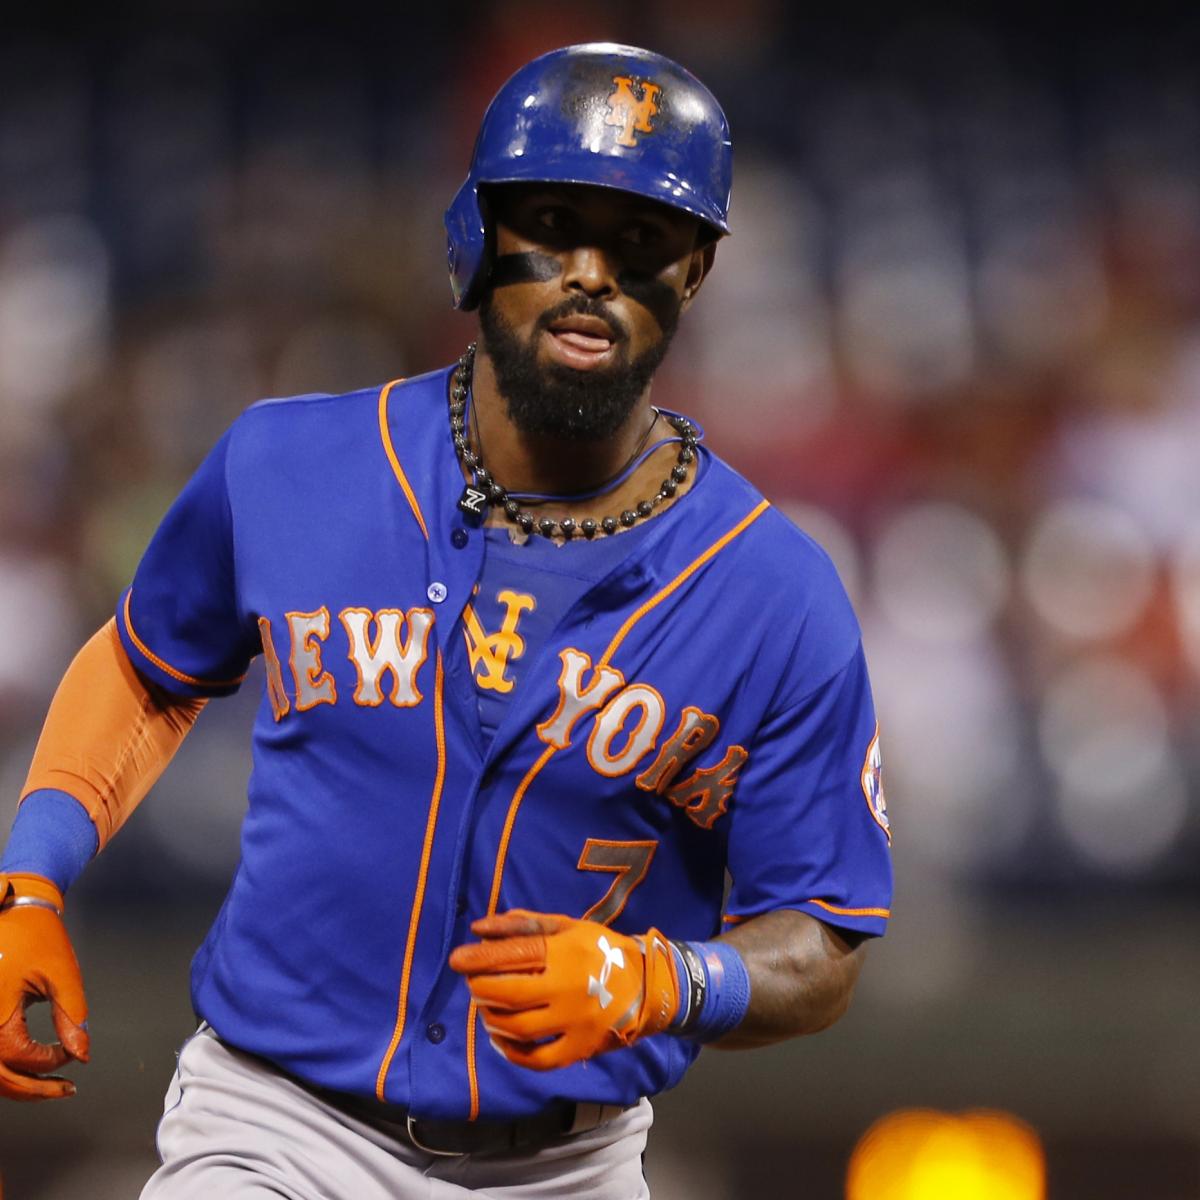 Mets icon Jose Reyes has slid head first into a successful music career